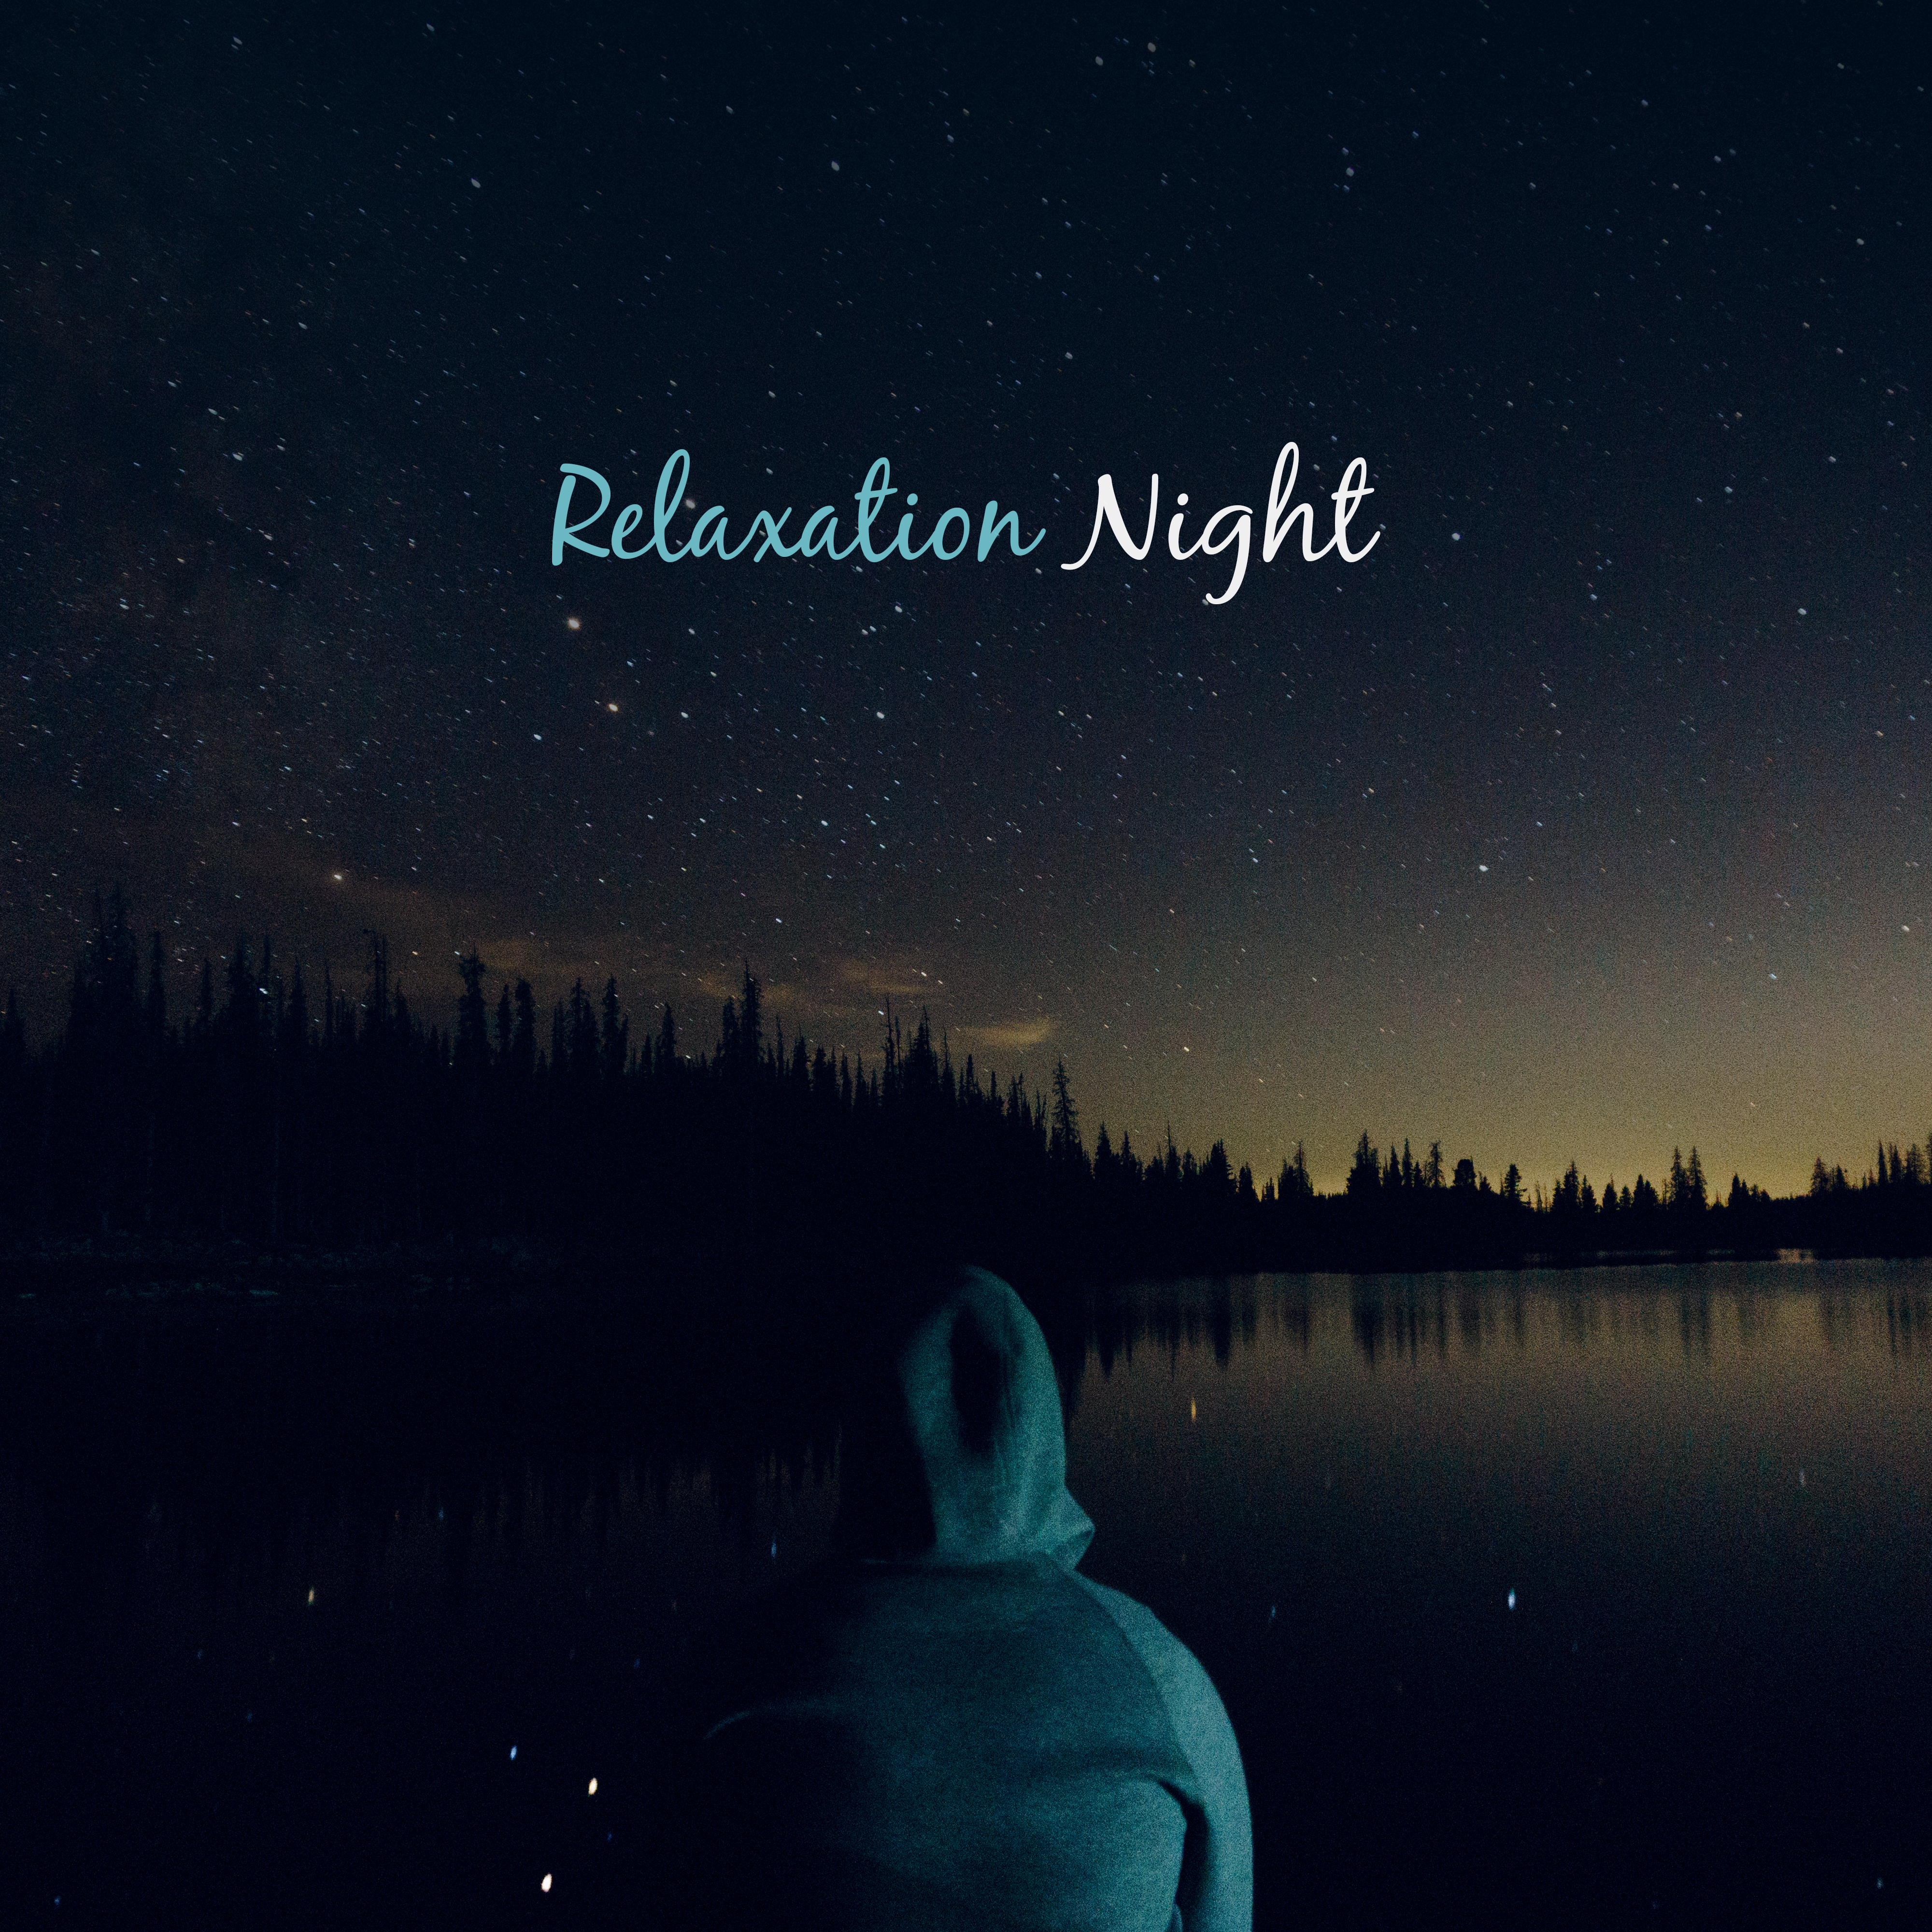 Relaxation Night  Restful Sleep, Stress Relief, Lullaby at Goodnight, Therapy Music, Sweet Dreams, Peaceful Mind, Calm Down, Relaxation Bedtime